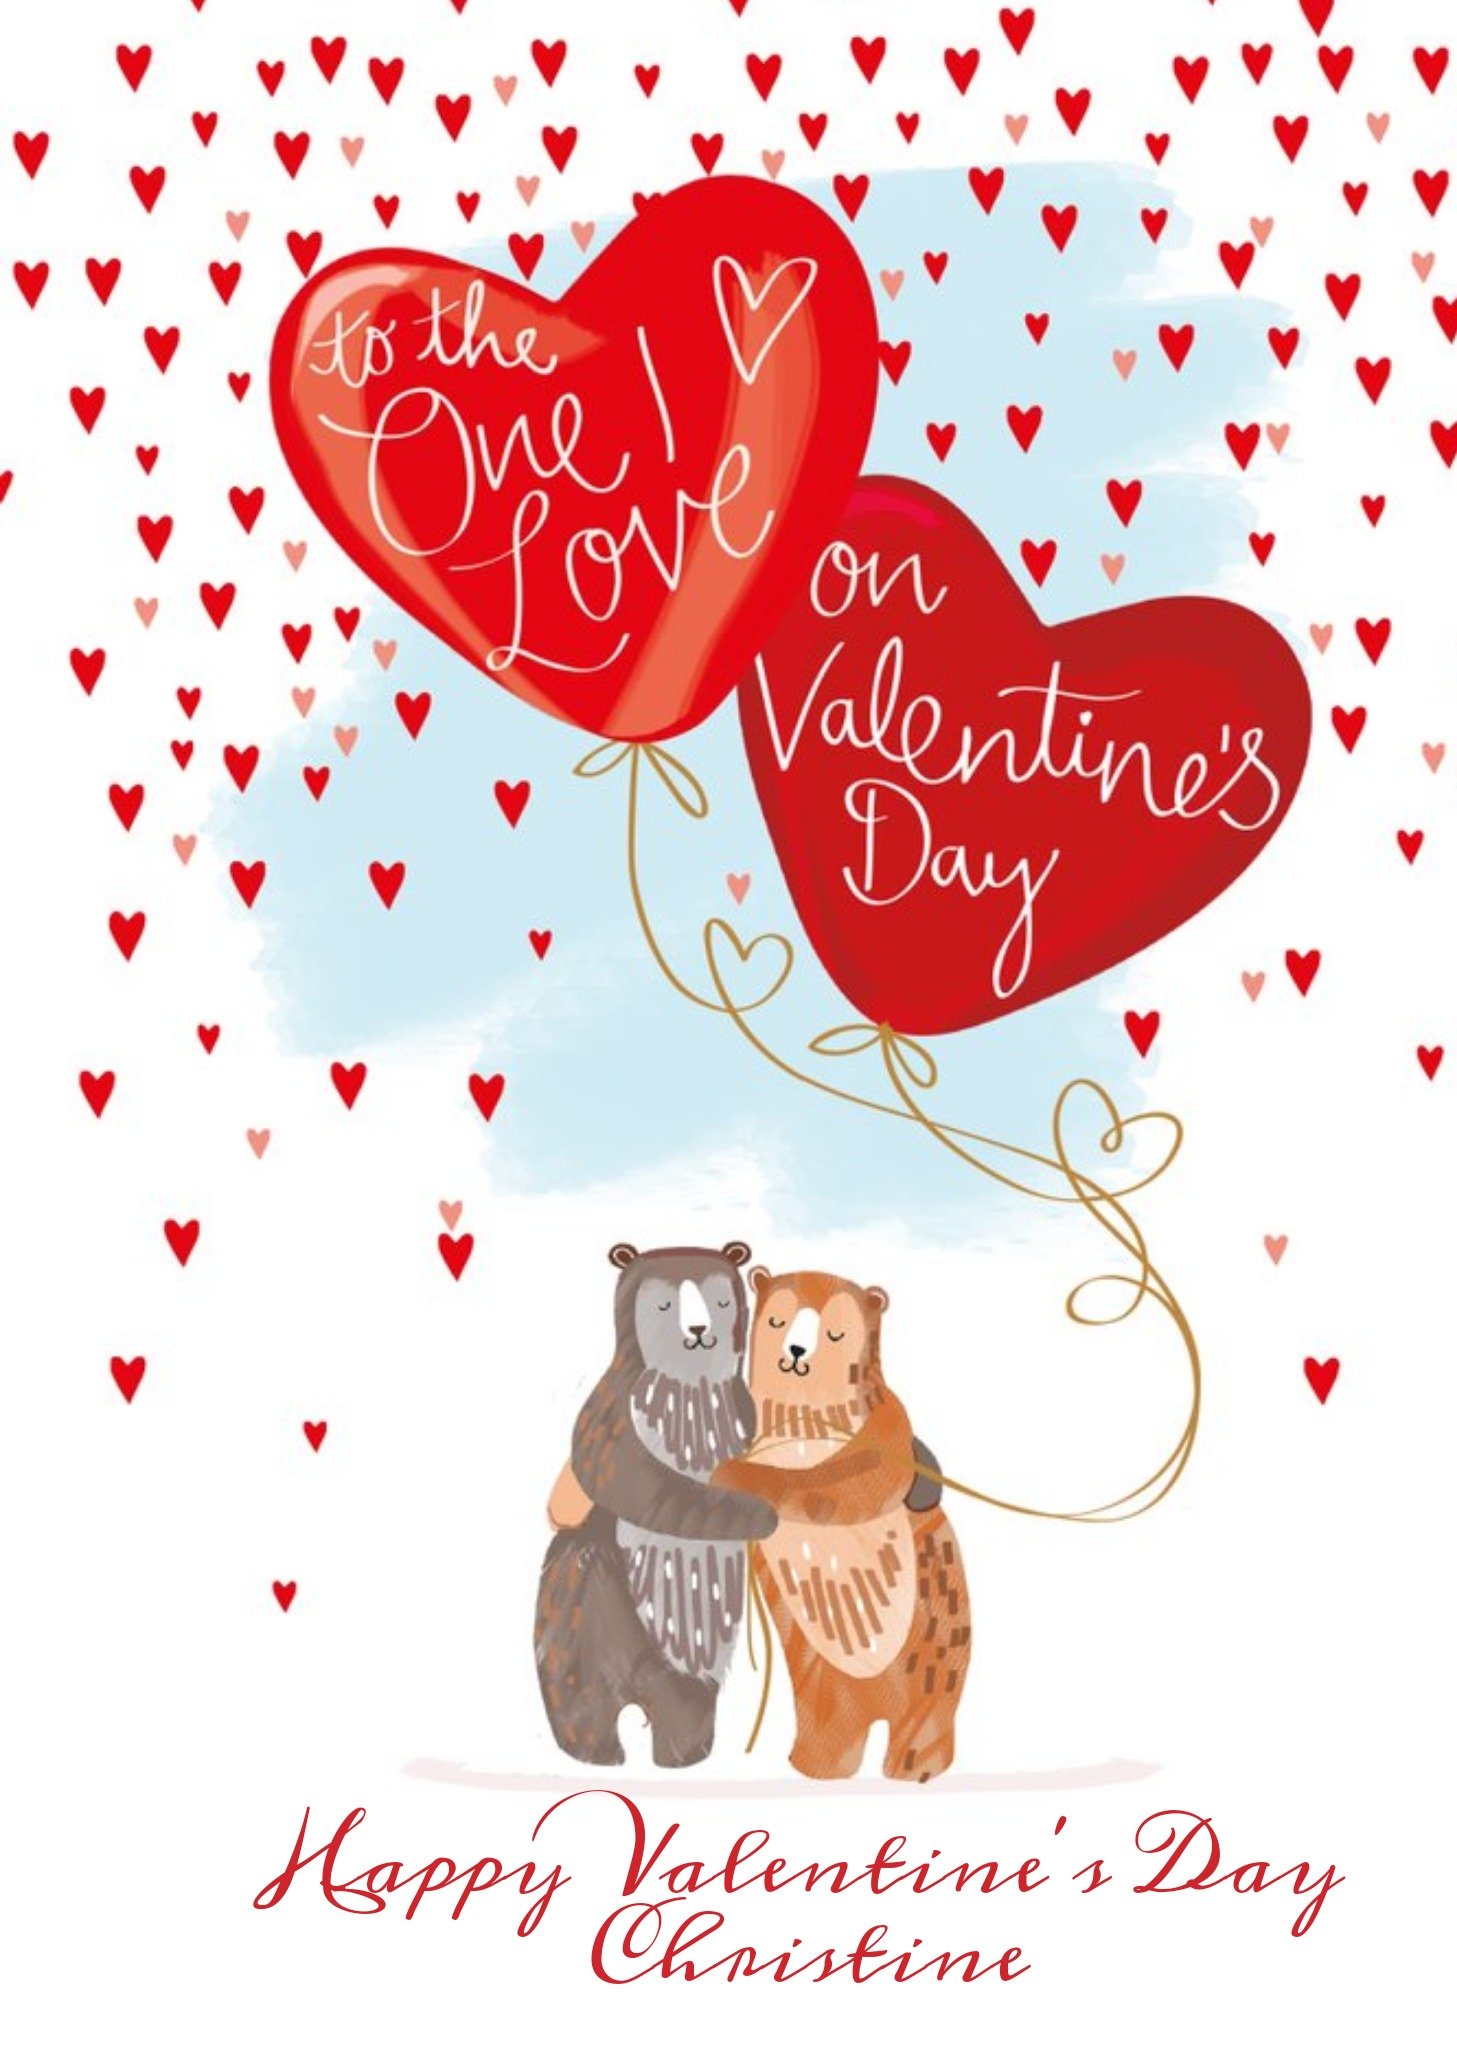 Ling Design Cute Cuddling Bears To The One I Love Valentine's Day Card Ecard